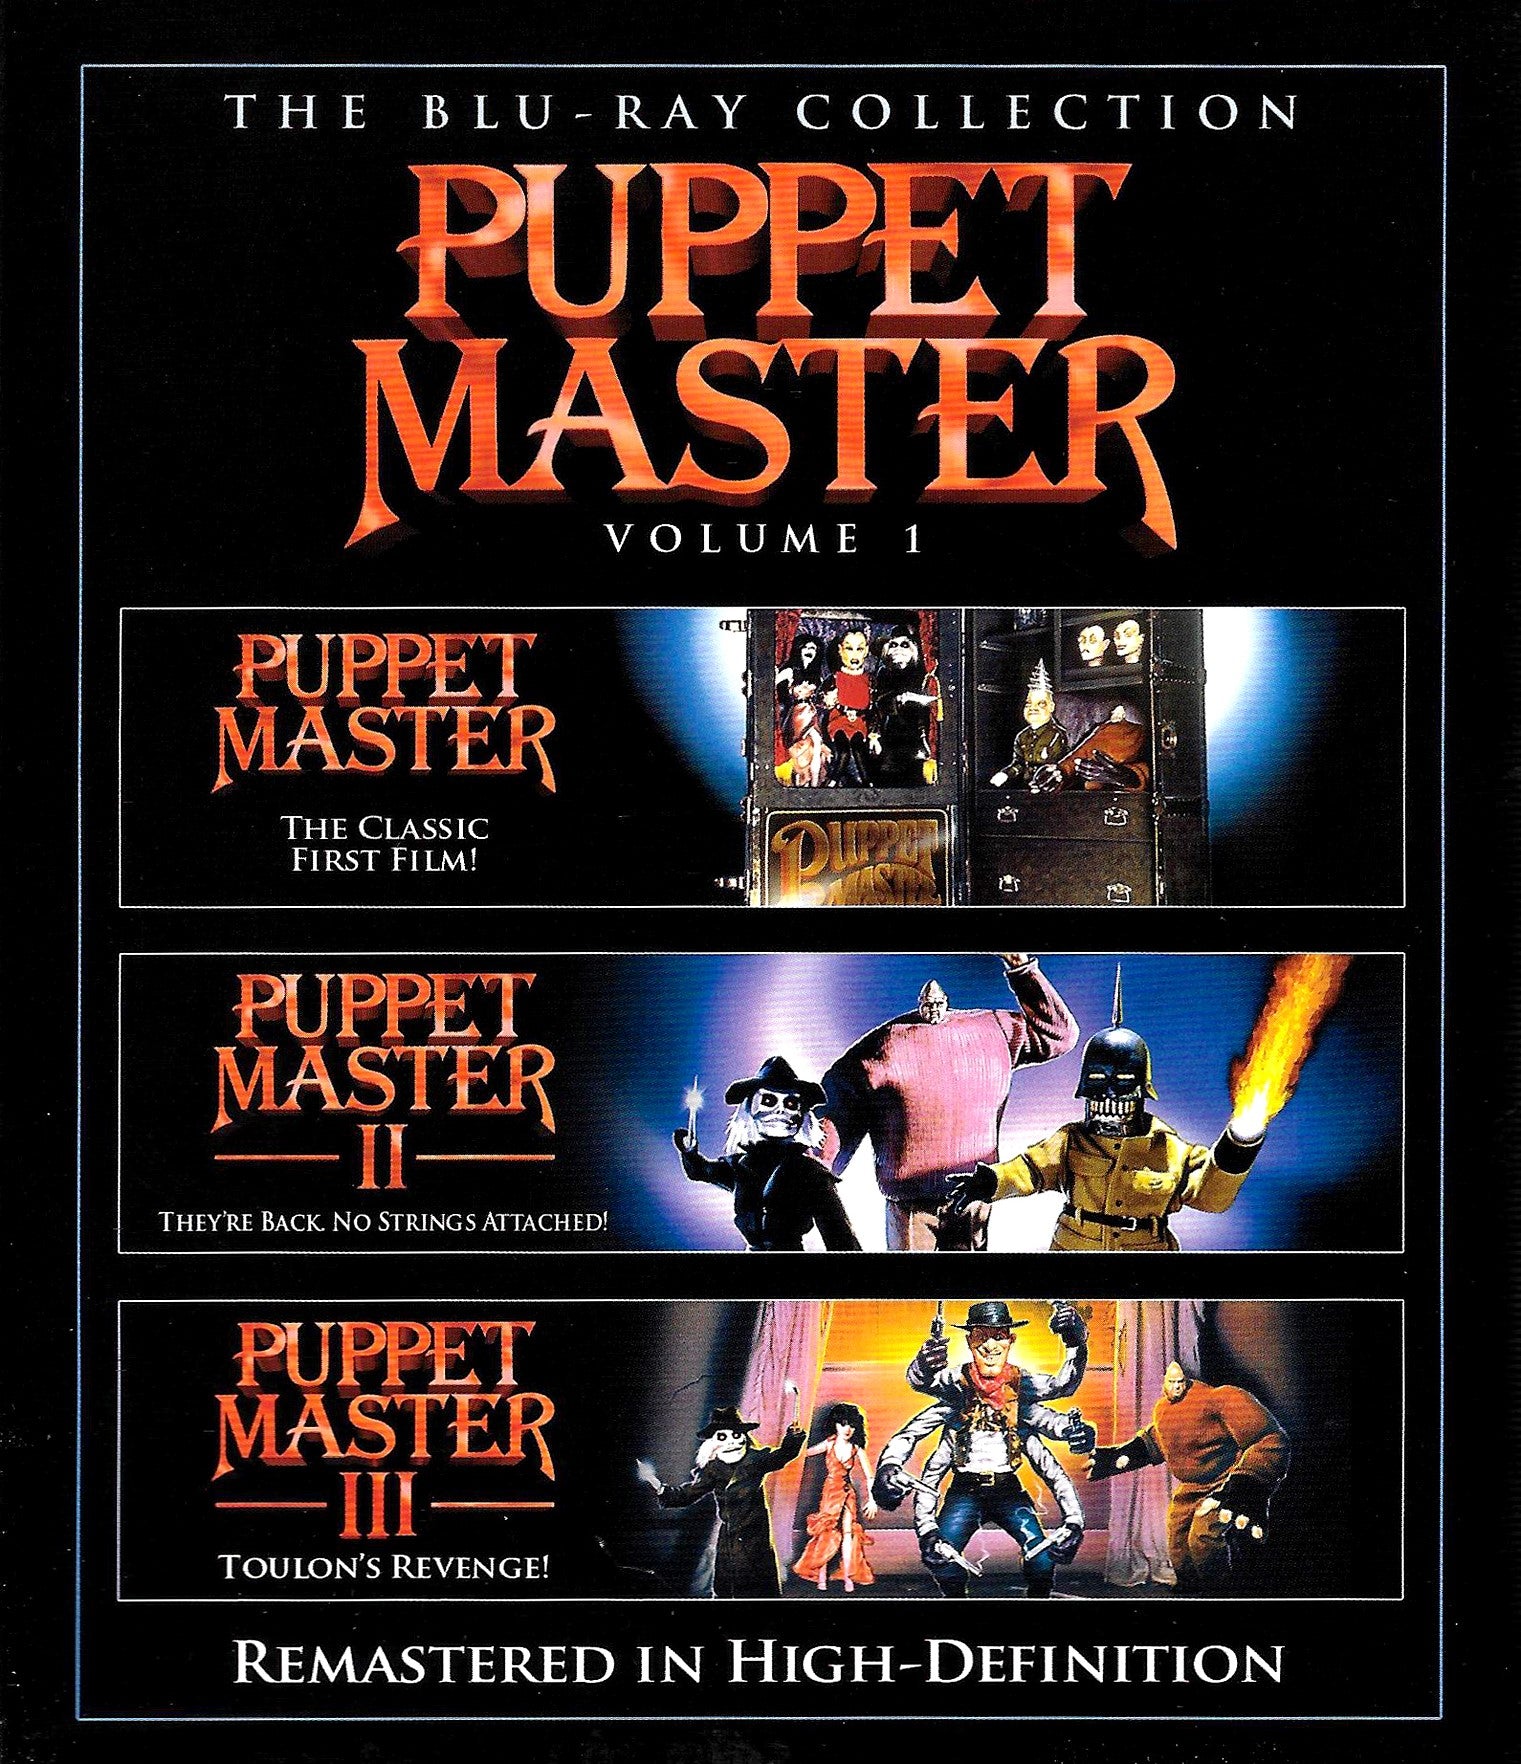 THE PUPPET MASTER COLLECTION BLU-RAY